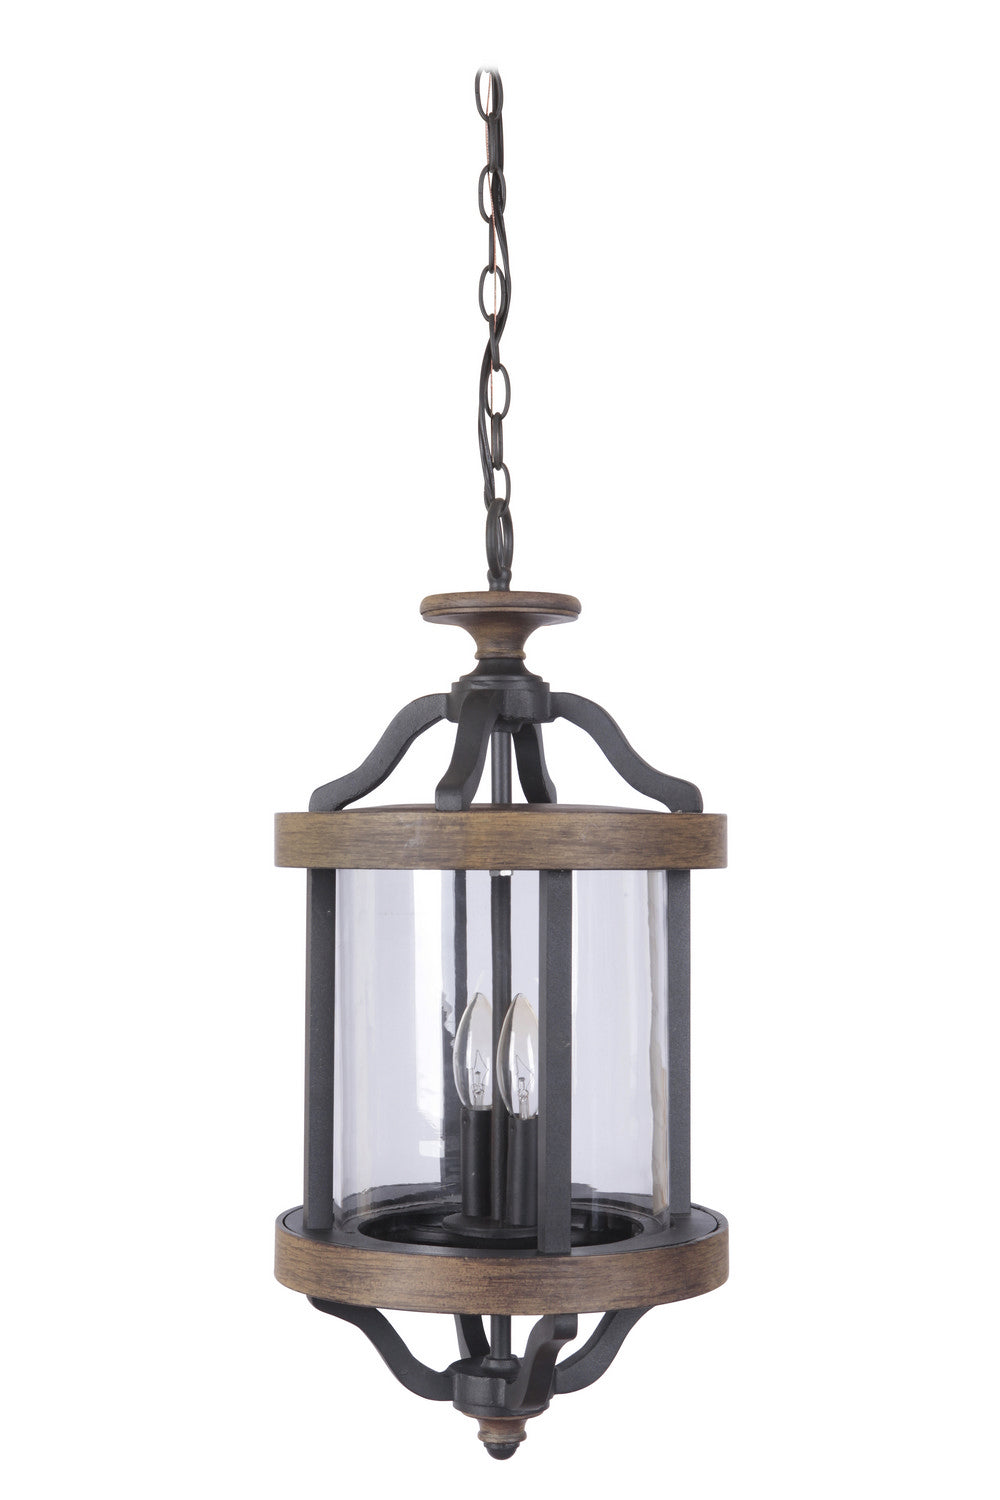 Craftmade Two Light Pendant from the Ashwood collection in Textured Black/Whiskey Barrel finish